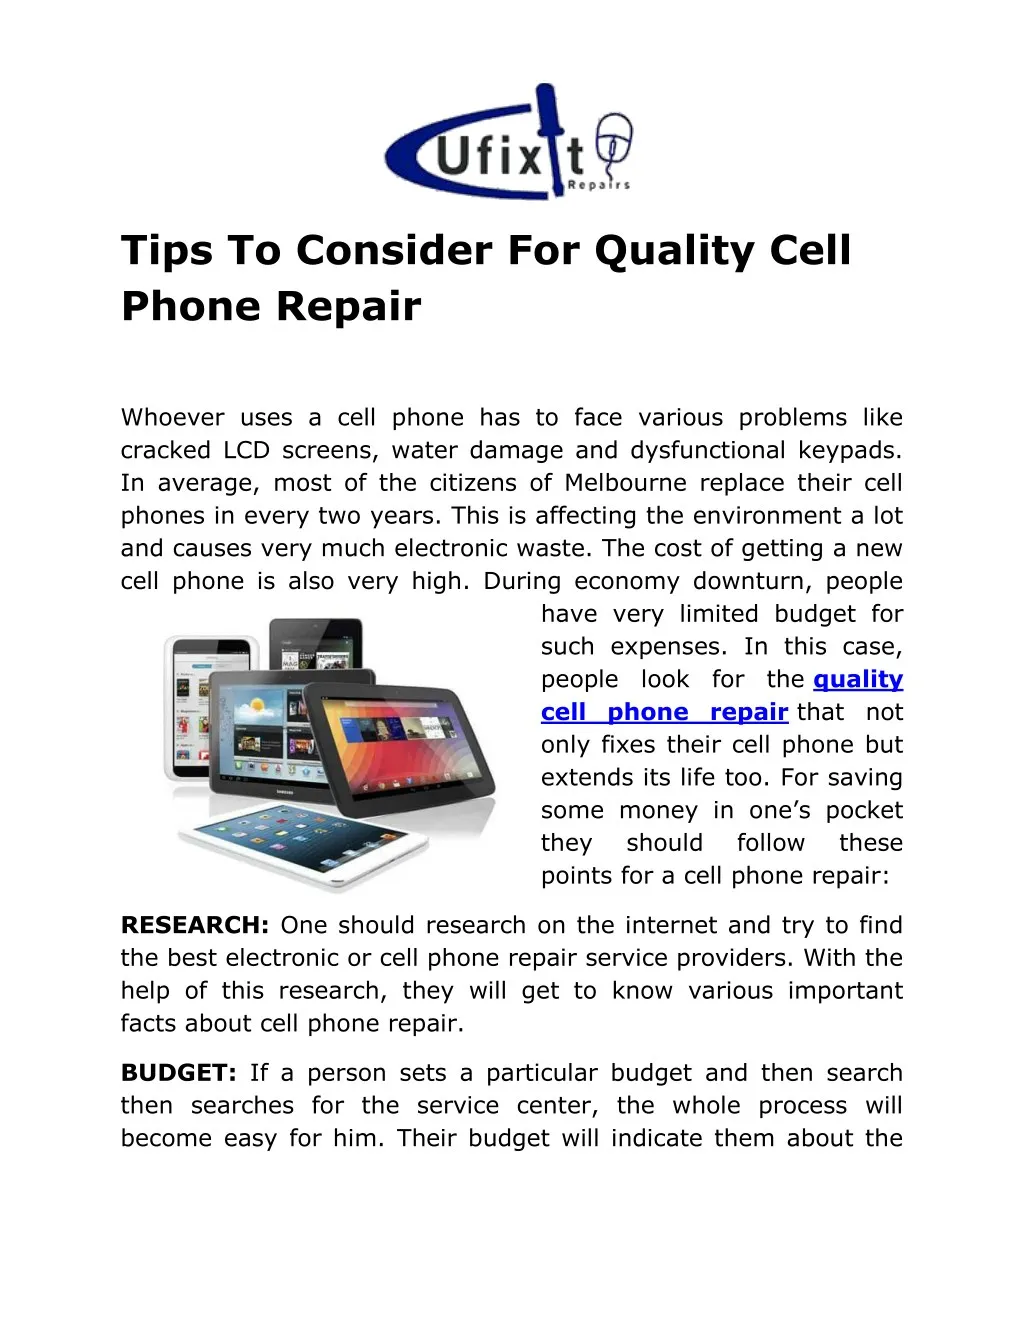 tips to consider for quality cell phone repair